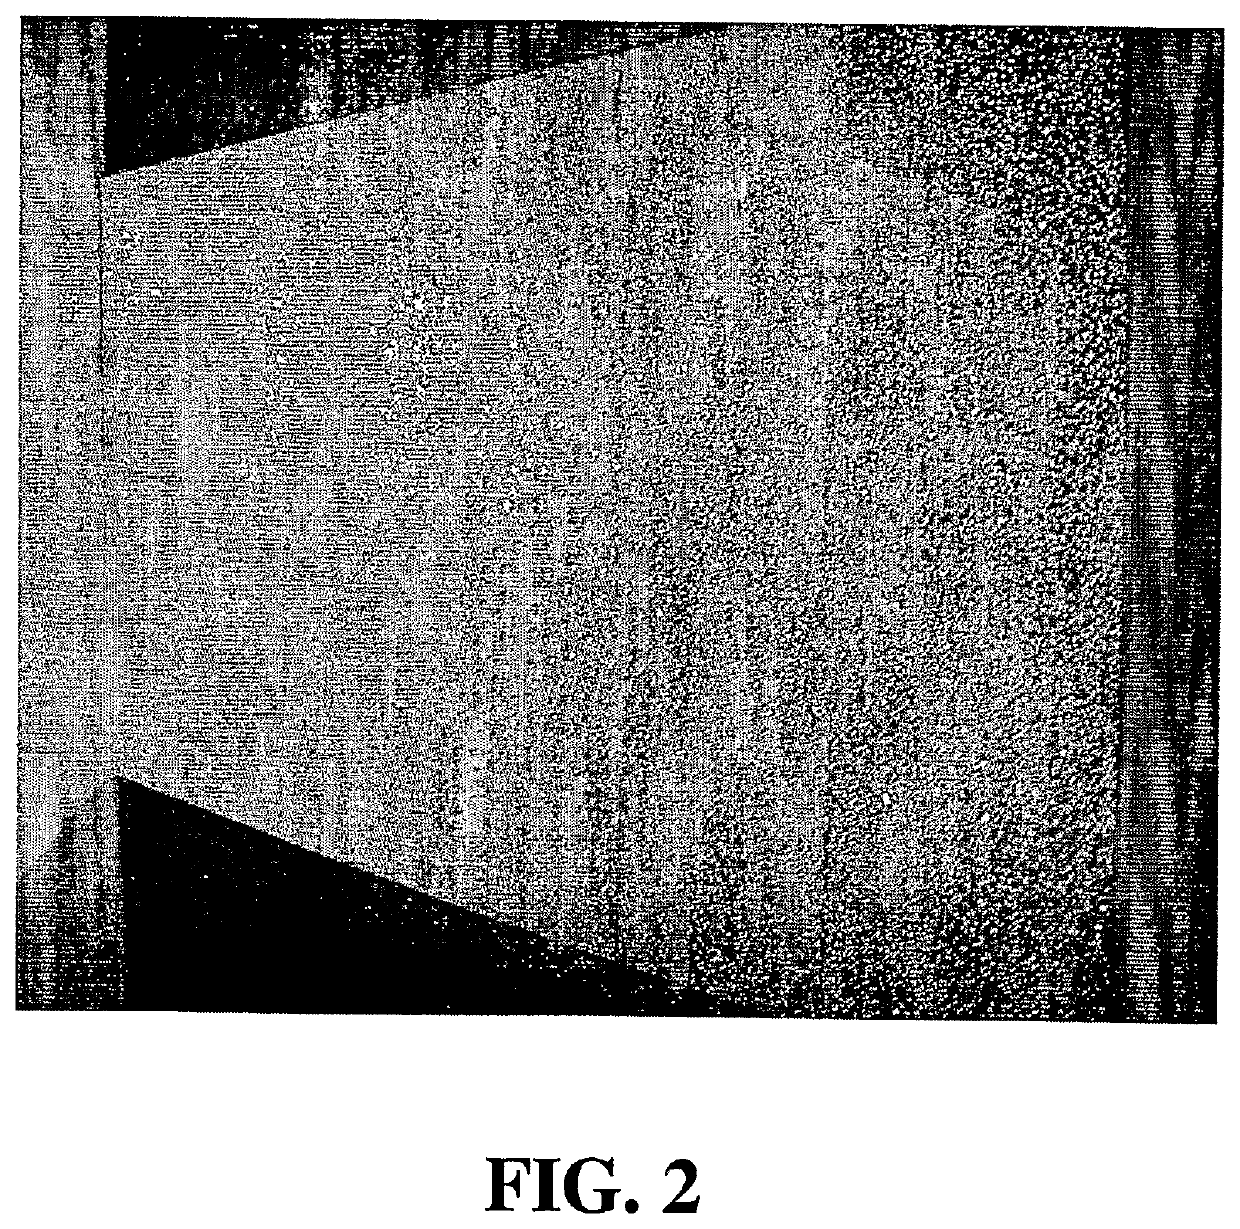 Articles having improved corrosion resistance